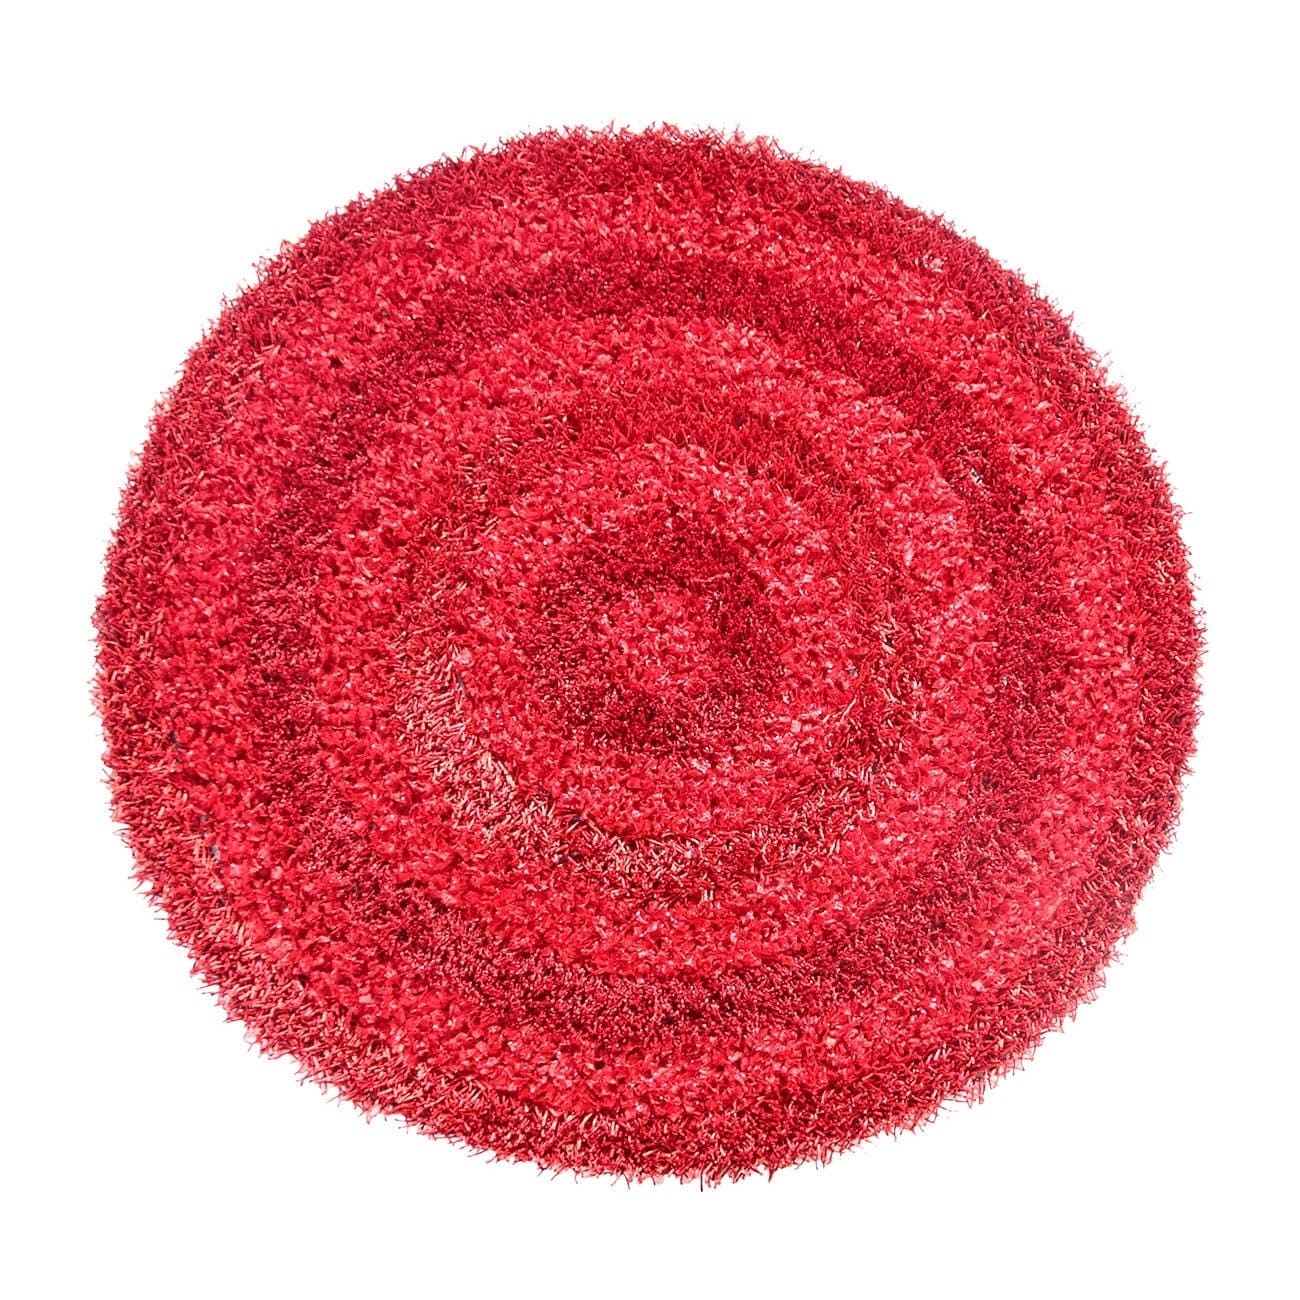 Sea Breeze Red Shag Rug (4.9 inches Round)